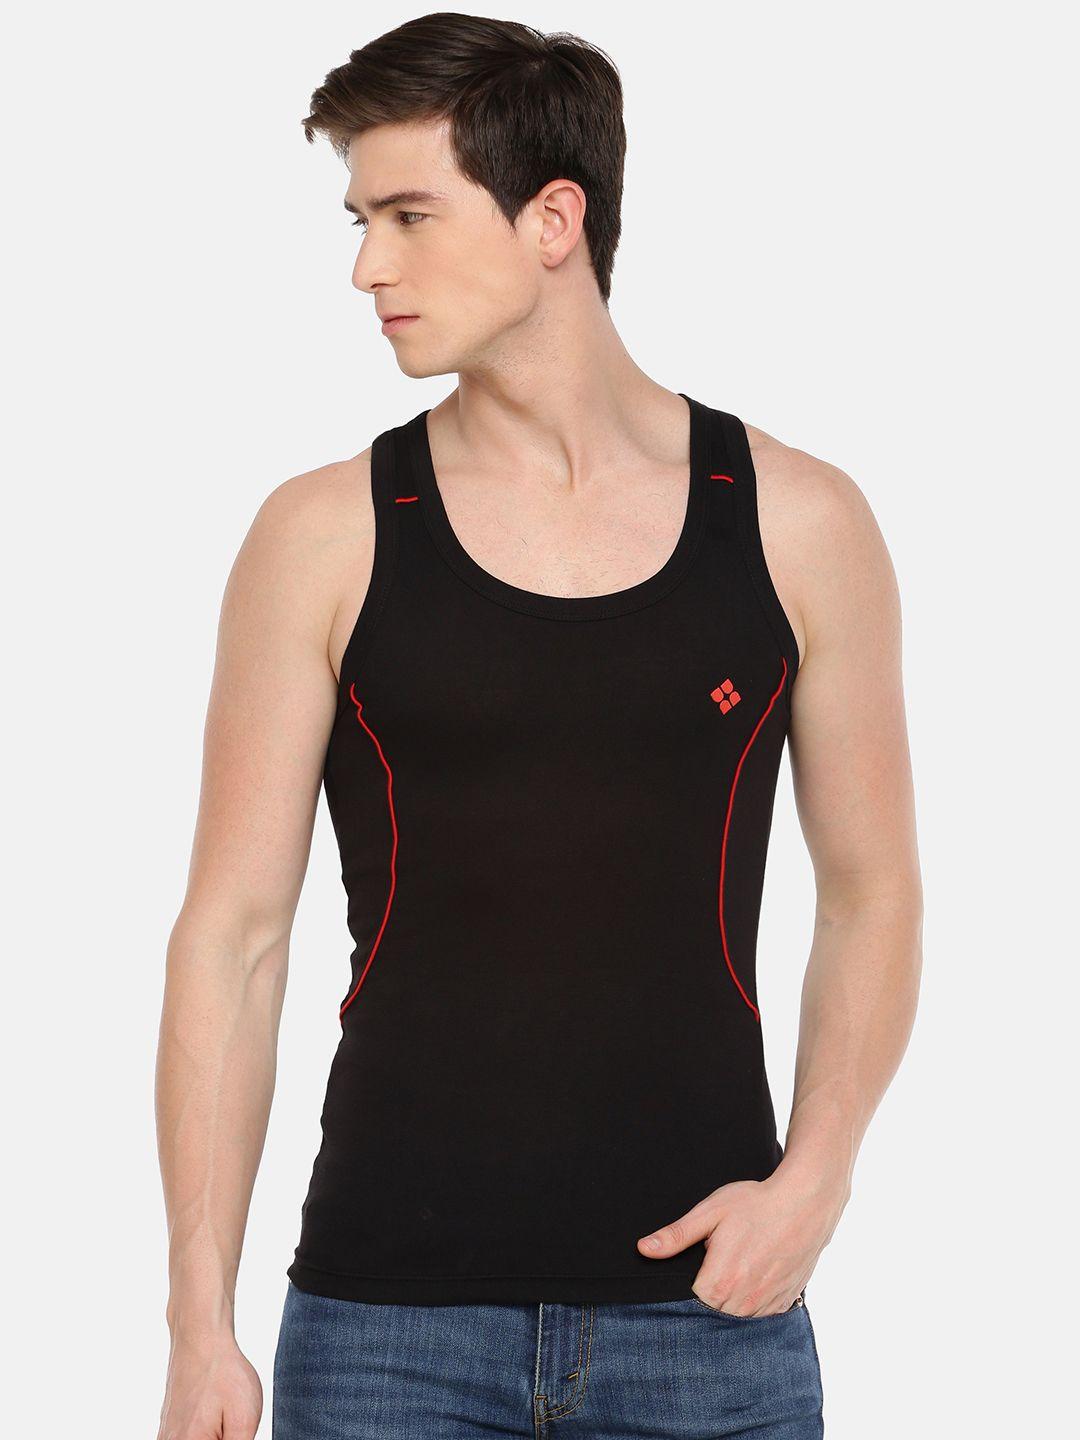 dollar bigboss assorted combed cotton racerback styled gym vest mbb-20-po1-co1-s24